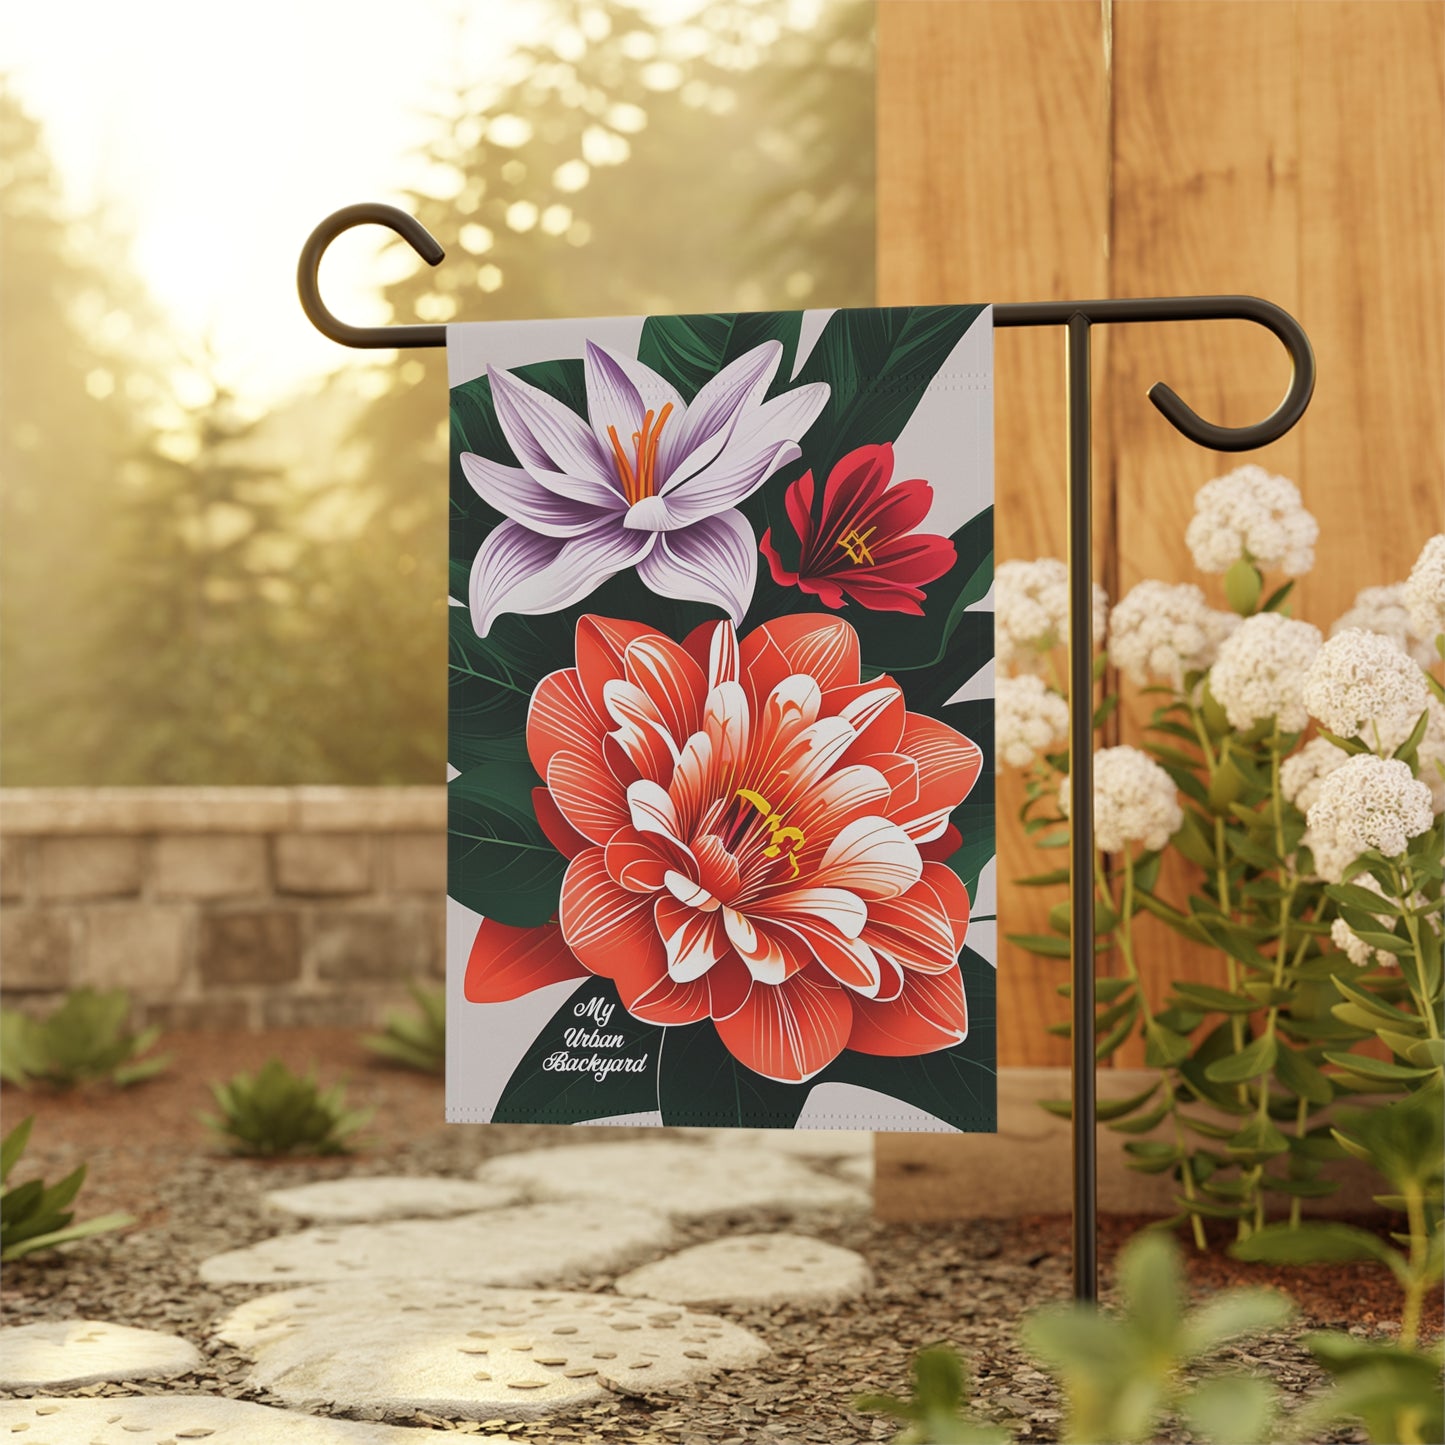 3 Flowers, Garden Flag for Yard, Patio, Porch, or Work, 12"x18" - Flag only